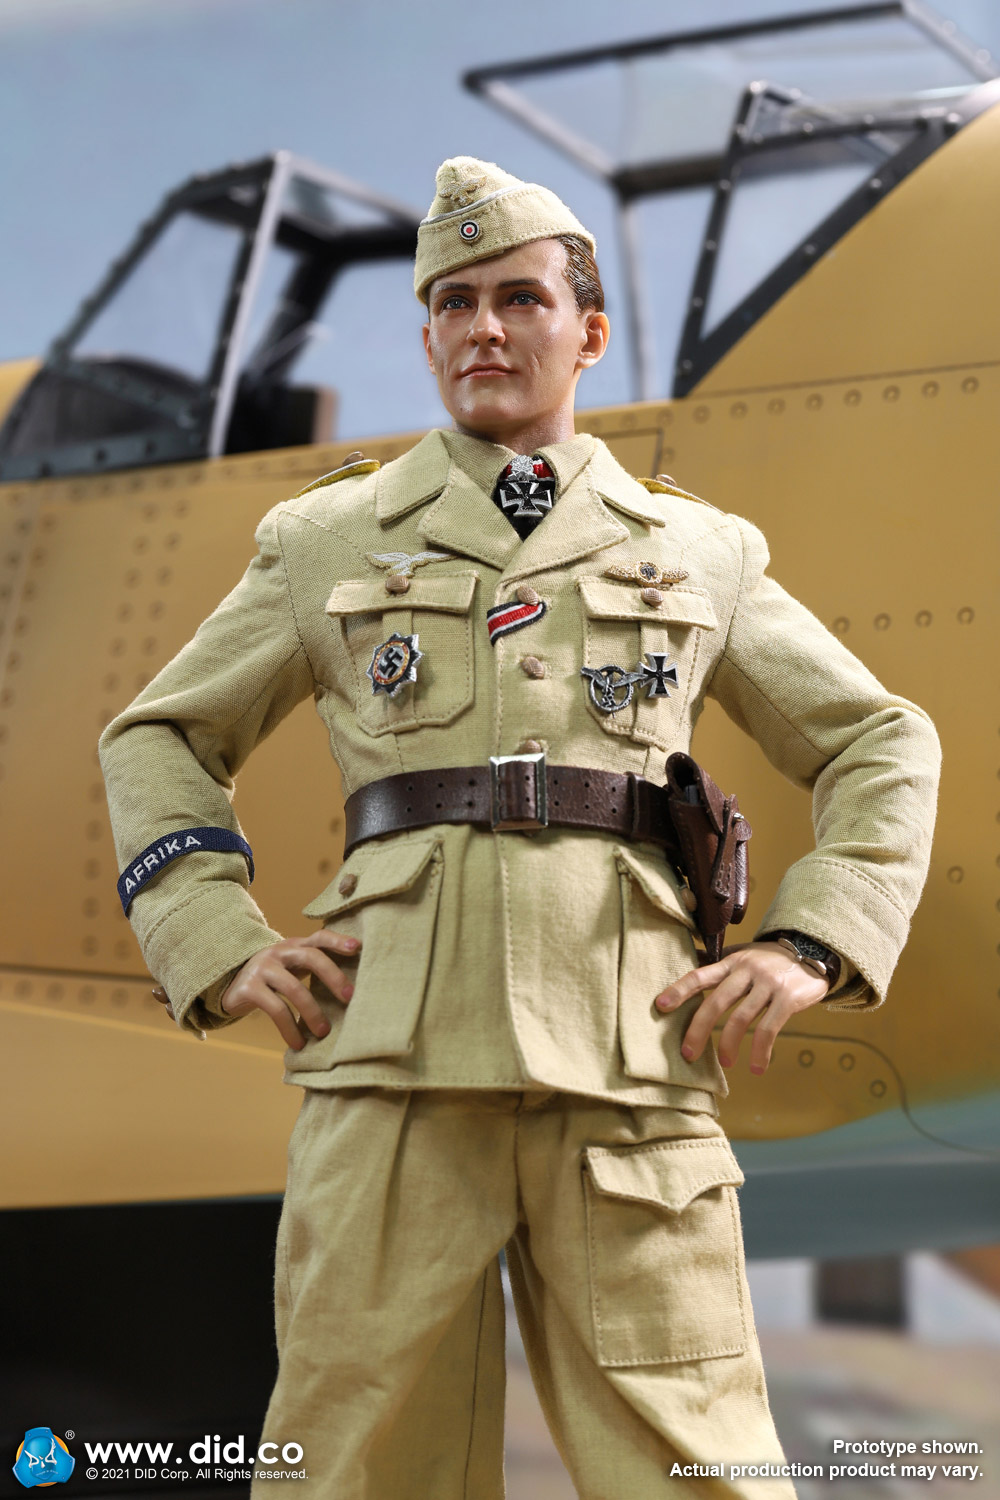 WWII - NEW PRODUCT: D80154 WWII German Luftwaffe Flying Ace “Star Of Africa” – Hans-Joachim Marseille & E60060  Diorama Of “Star Of Africa” 10404